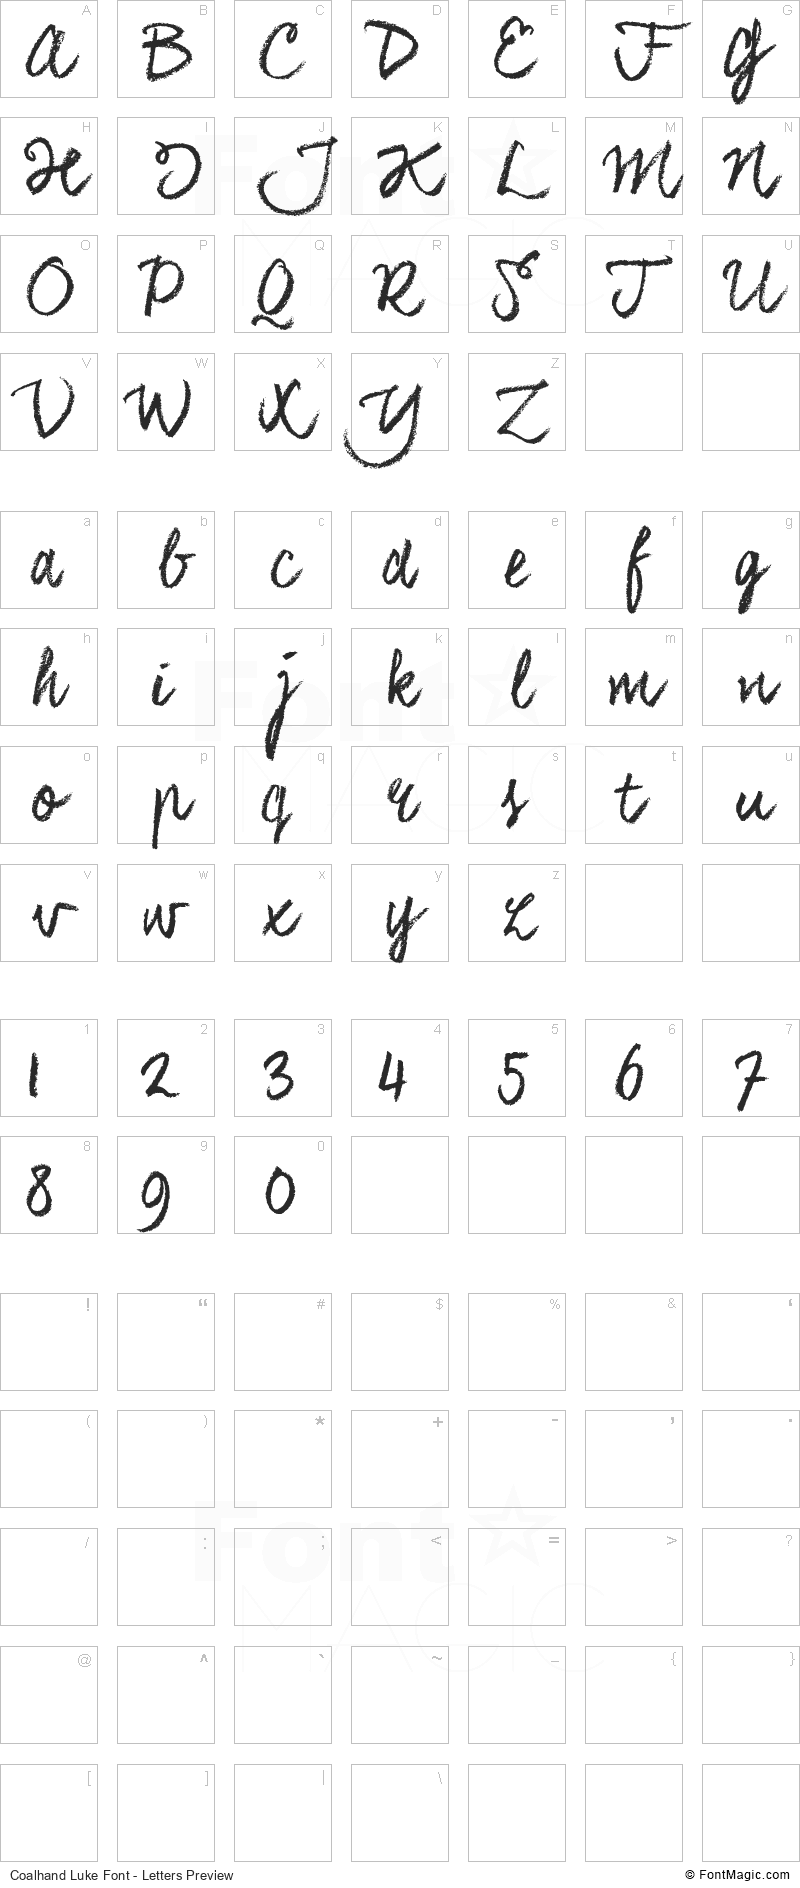 Coalhand Luke Font - All Latters Preview Chart